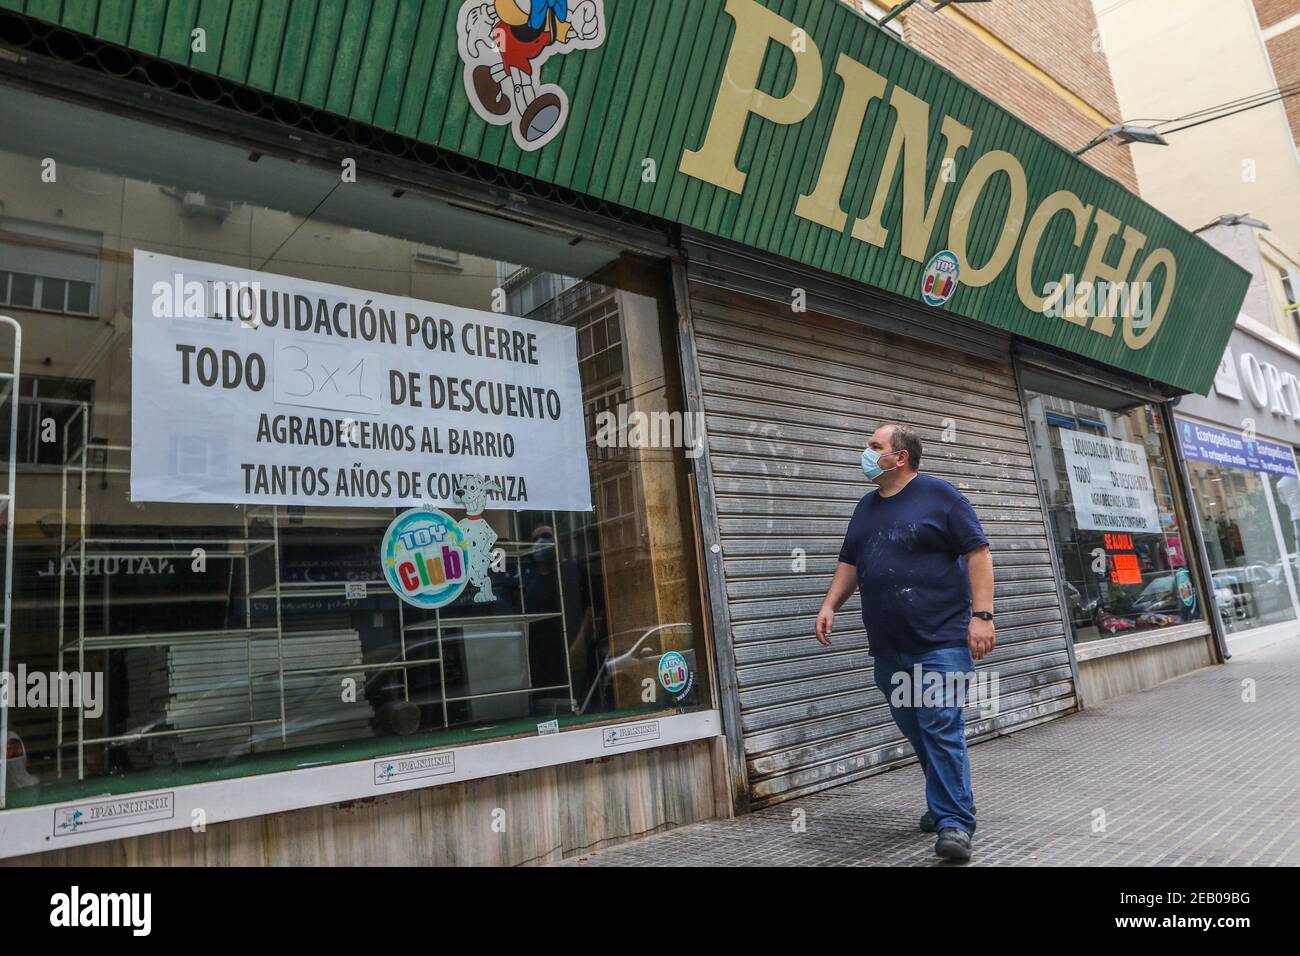 Malaga, Spain. February 11, 2021: February 11, 2021 (Malaga) It does not stop increasing the number of companies, businesses, driving schools, Shops that put the settlement cartel for closure due to the health crisis of the Covid19 or coronavirus Credit: Lorenzo Carnero/ZUMA Wire/Alamy Live News Stock Photo